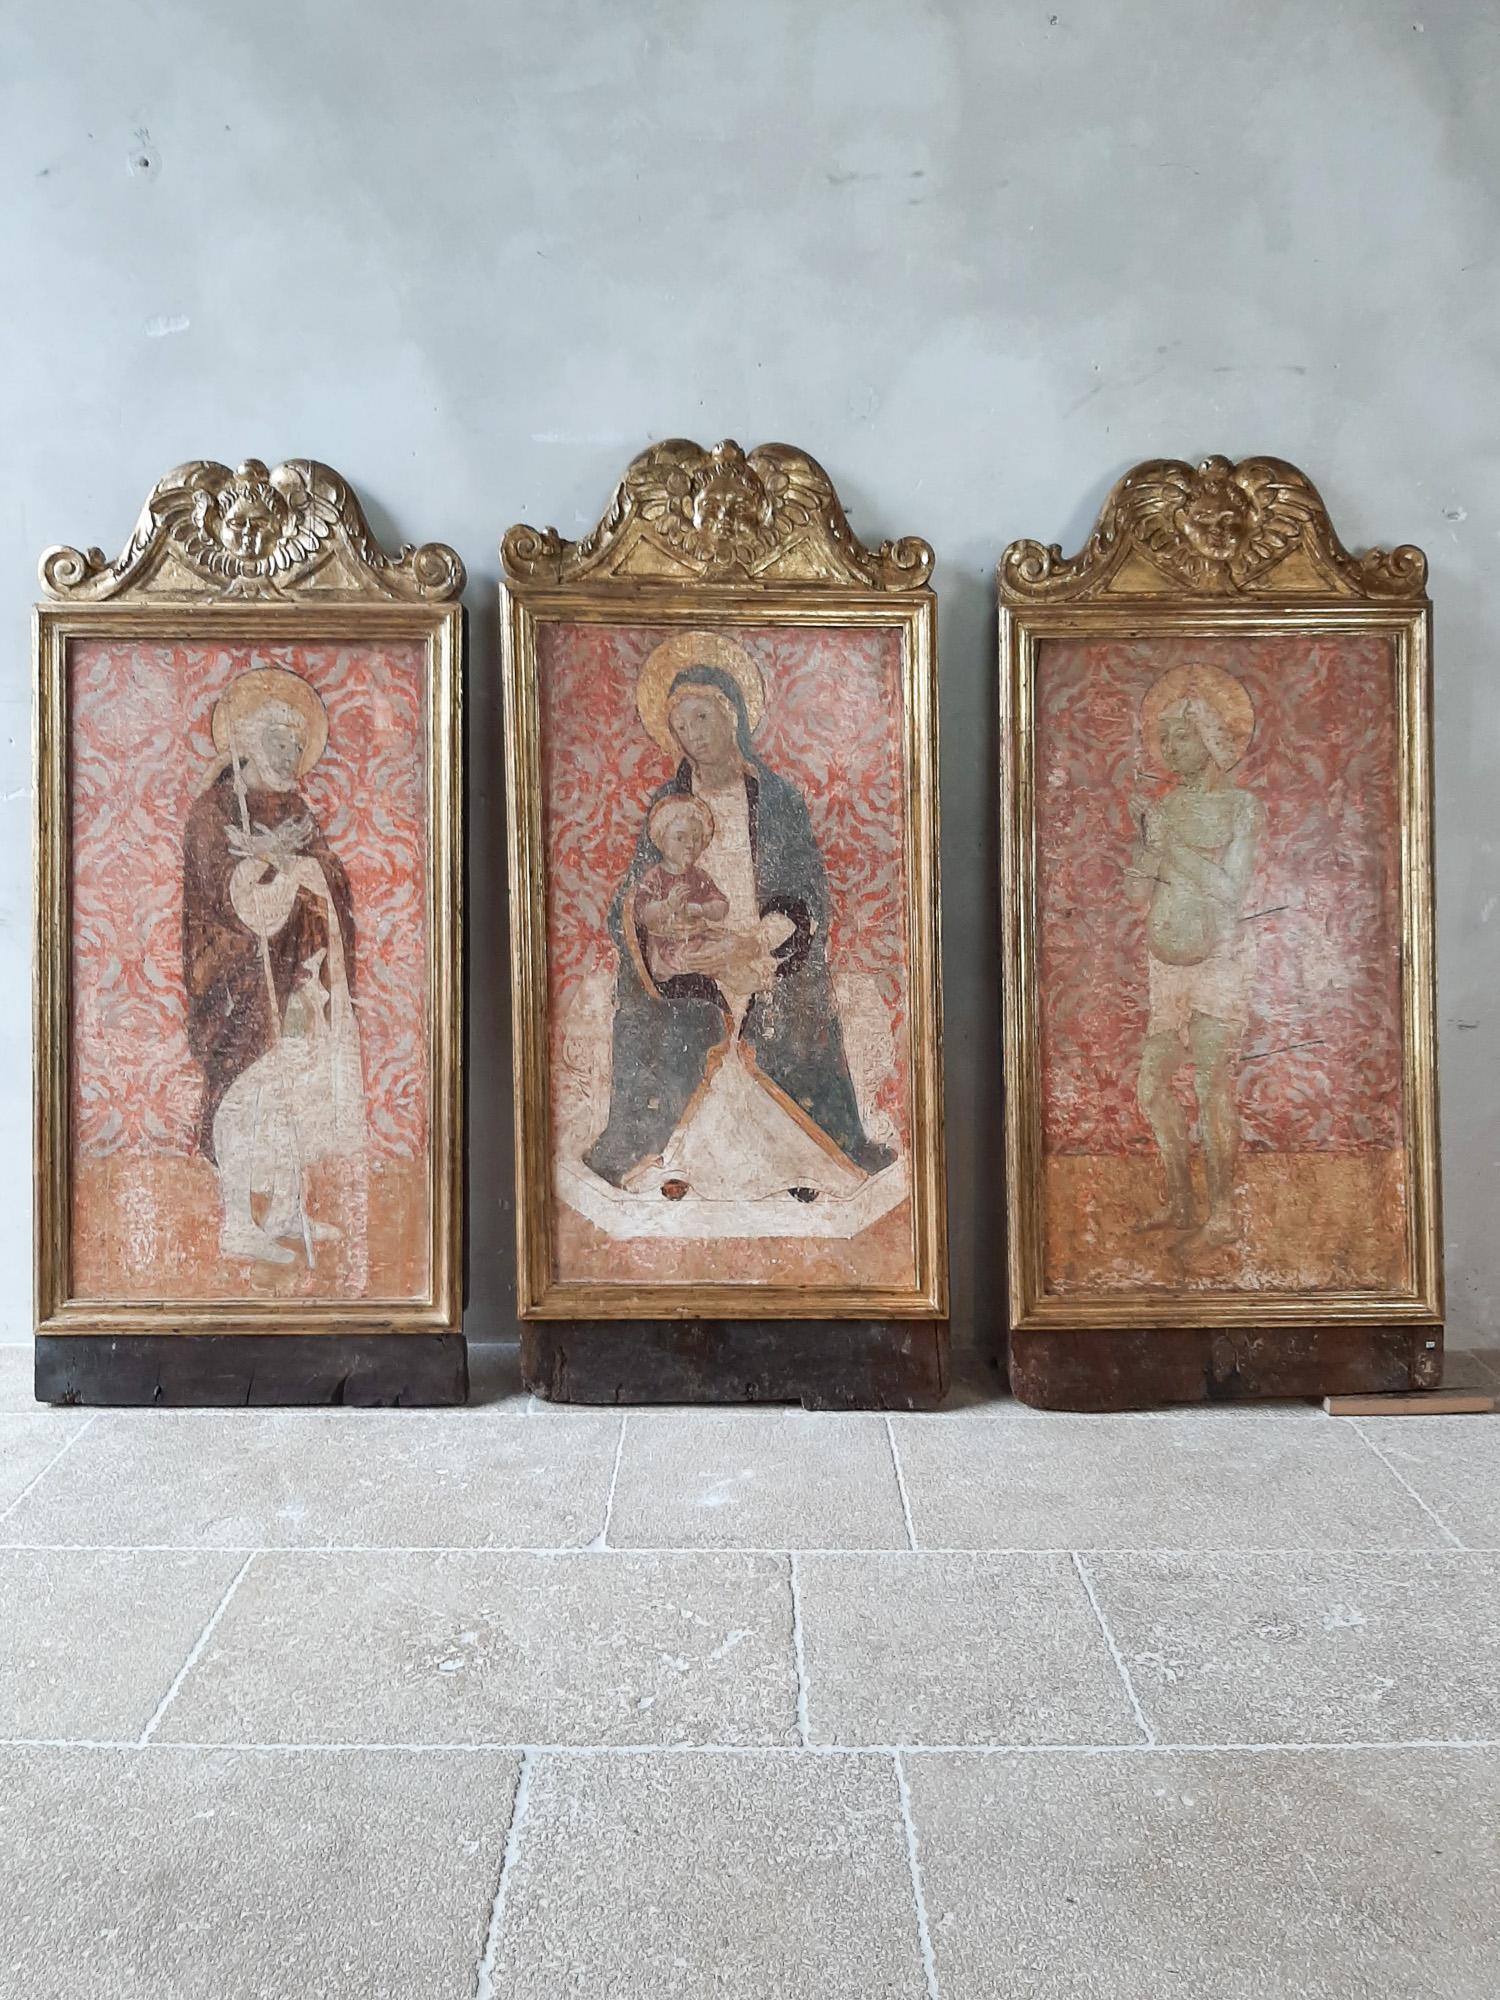 Triptych with fresco dating from the 14th to 15th century. Siena, Italy.

Three very old, special frescoes on walnut depicting the Madonna and Child (center), Saint Roch (left) and Saint Sebastian (right).

Hand-carved wooden frames of which the